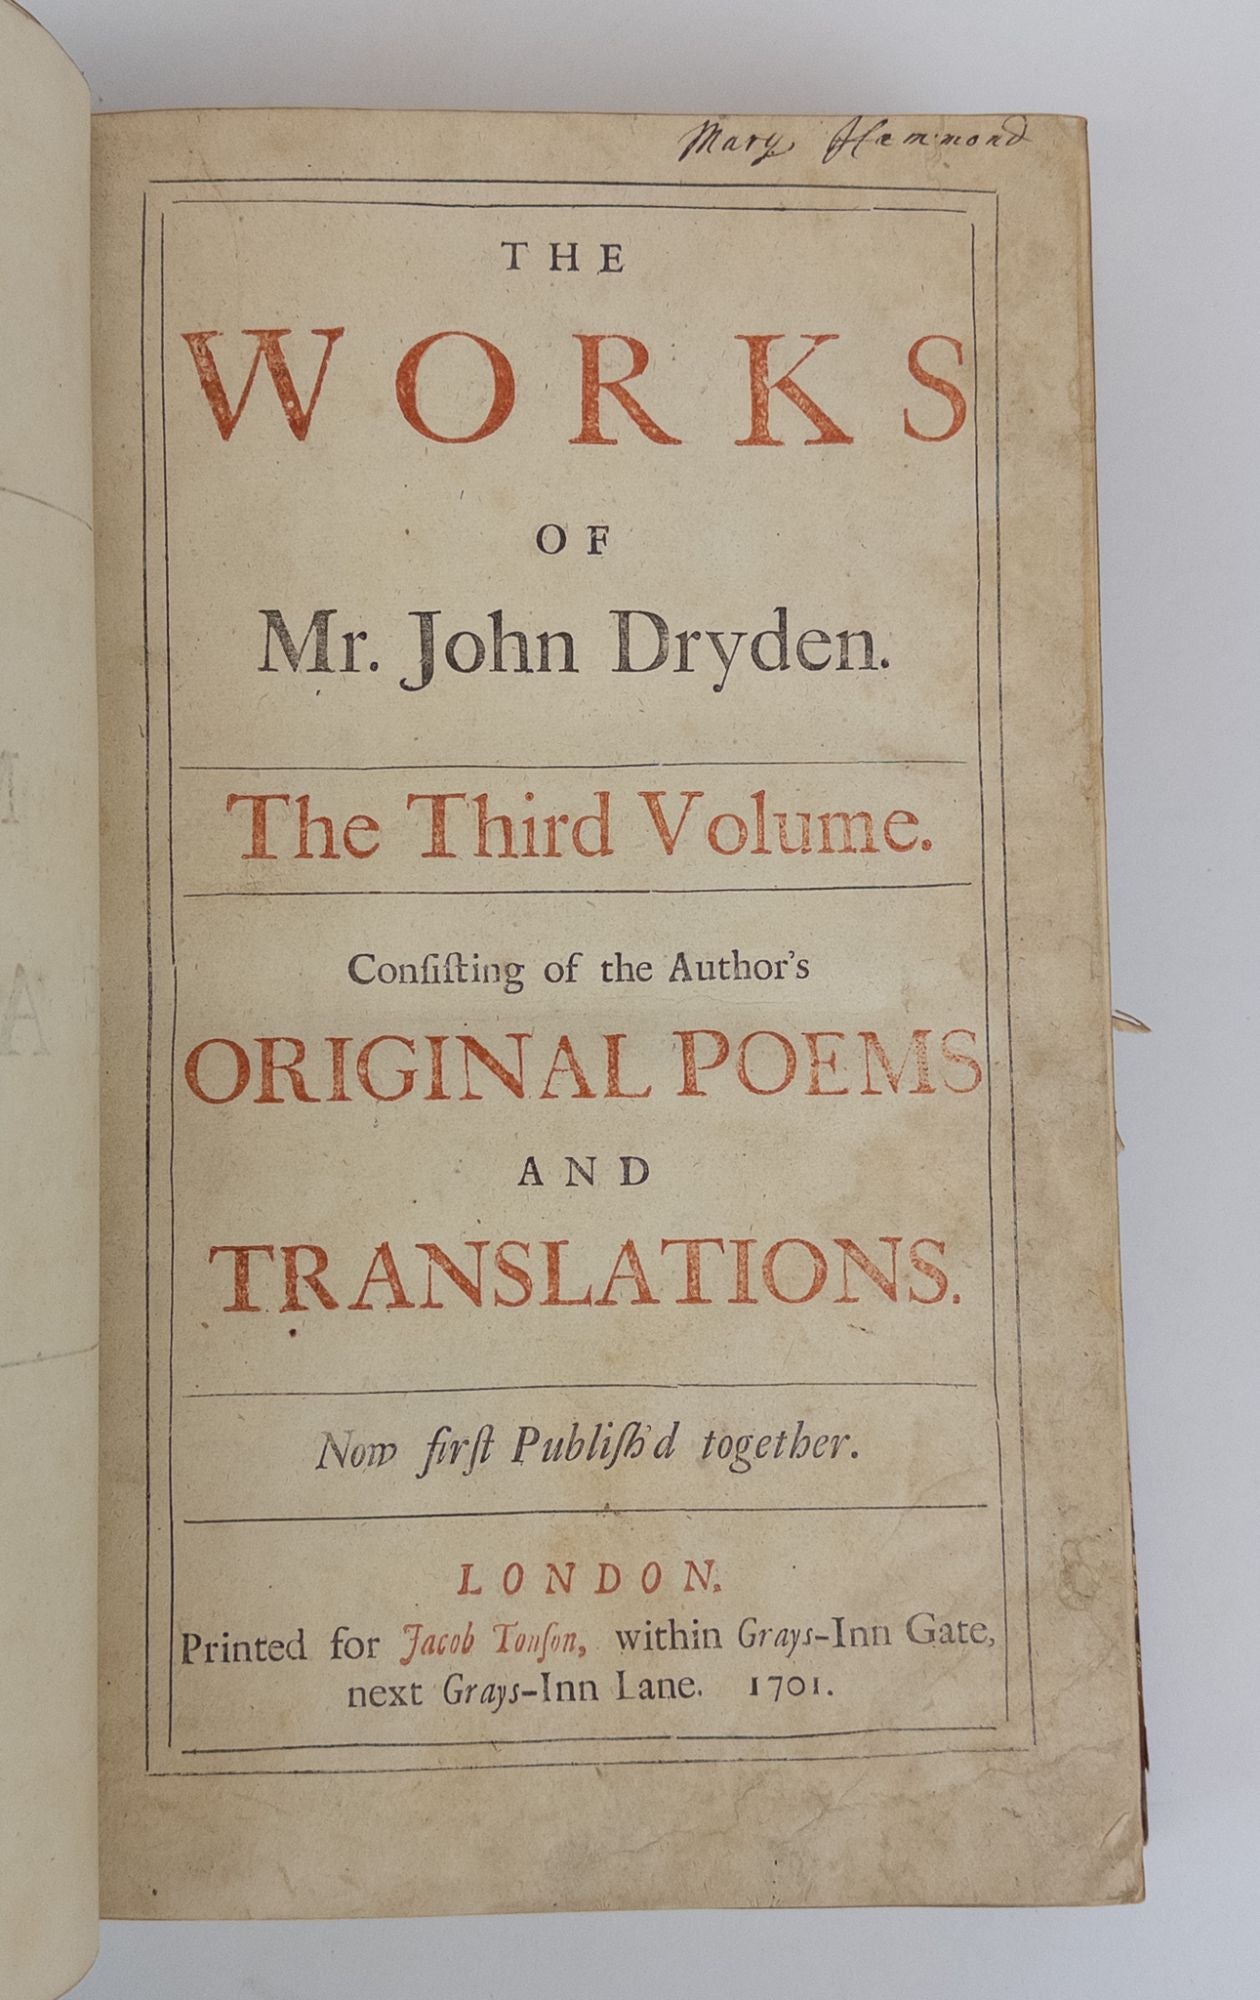 Product Image for THE WORKS OF Mr. JOHN DRYDEN CONSISTING OF THE AUTHOR'S ORIGINAL POEMS AND TRANSLATIONS. FABLES ANCIENT AND MODERN; TRANSLATED INTO VERSE FROM HOMER, OVID, BOCCACE, & CHAUCER WITH ORIGINAL POEMS. THE THIRD VOLUME. NOW FIRST PUBLISHED TOGETHER